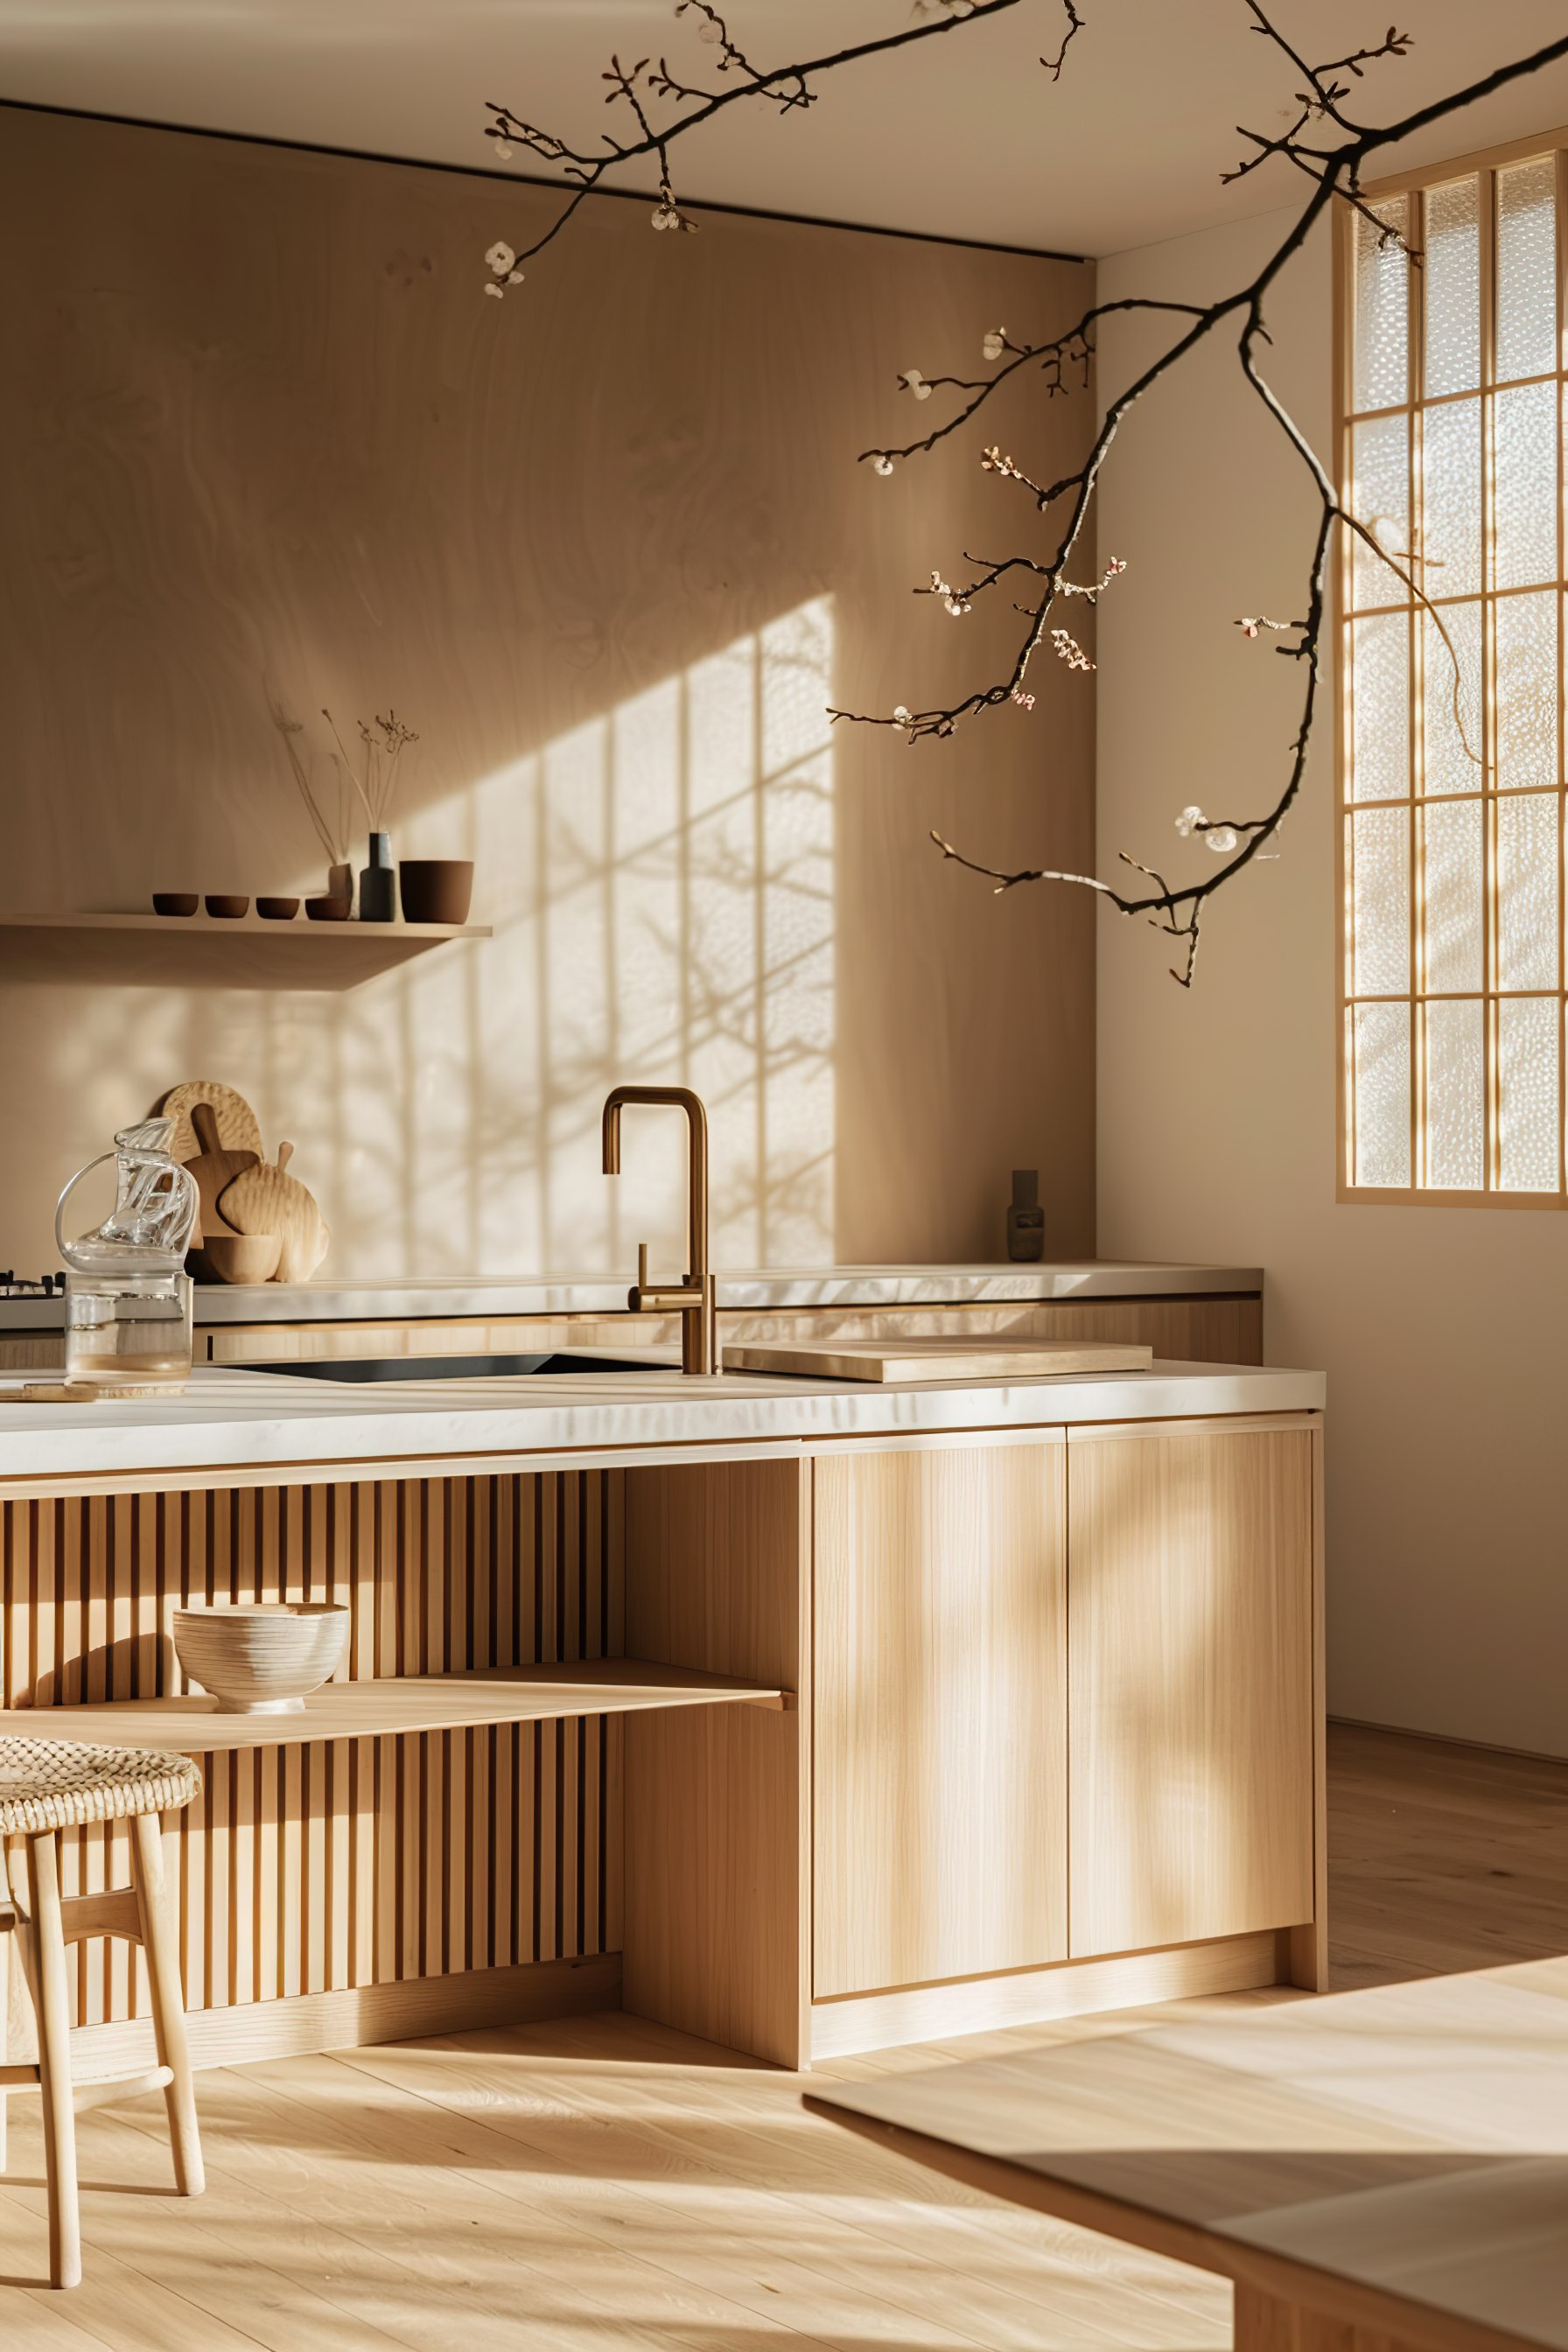 Modern kitchen interior with wooden cabinets and shelves, sunlight casting shadows through window, and decorative branch.